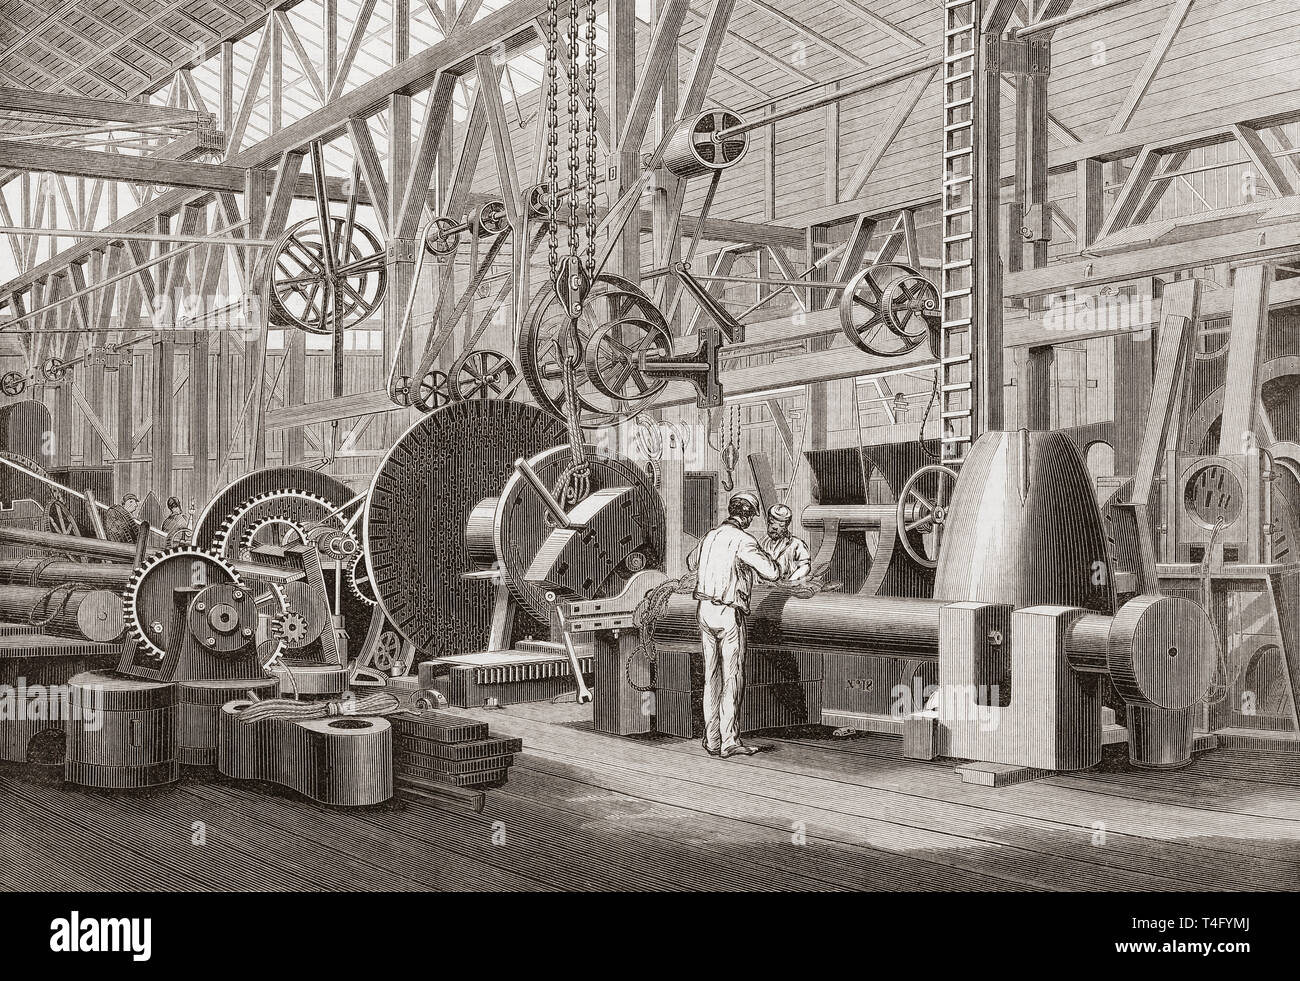 Penn's marine engine factory, Greenwich, London, England, 19th century. Turning a paddle shaft for a steam ship.  From The Illustrated London News, published 1865. Stock Photo